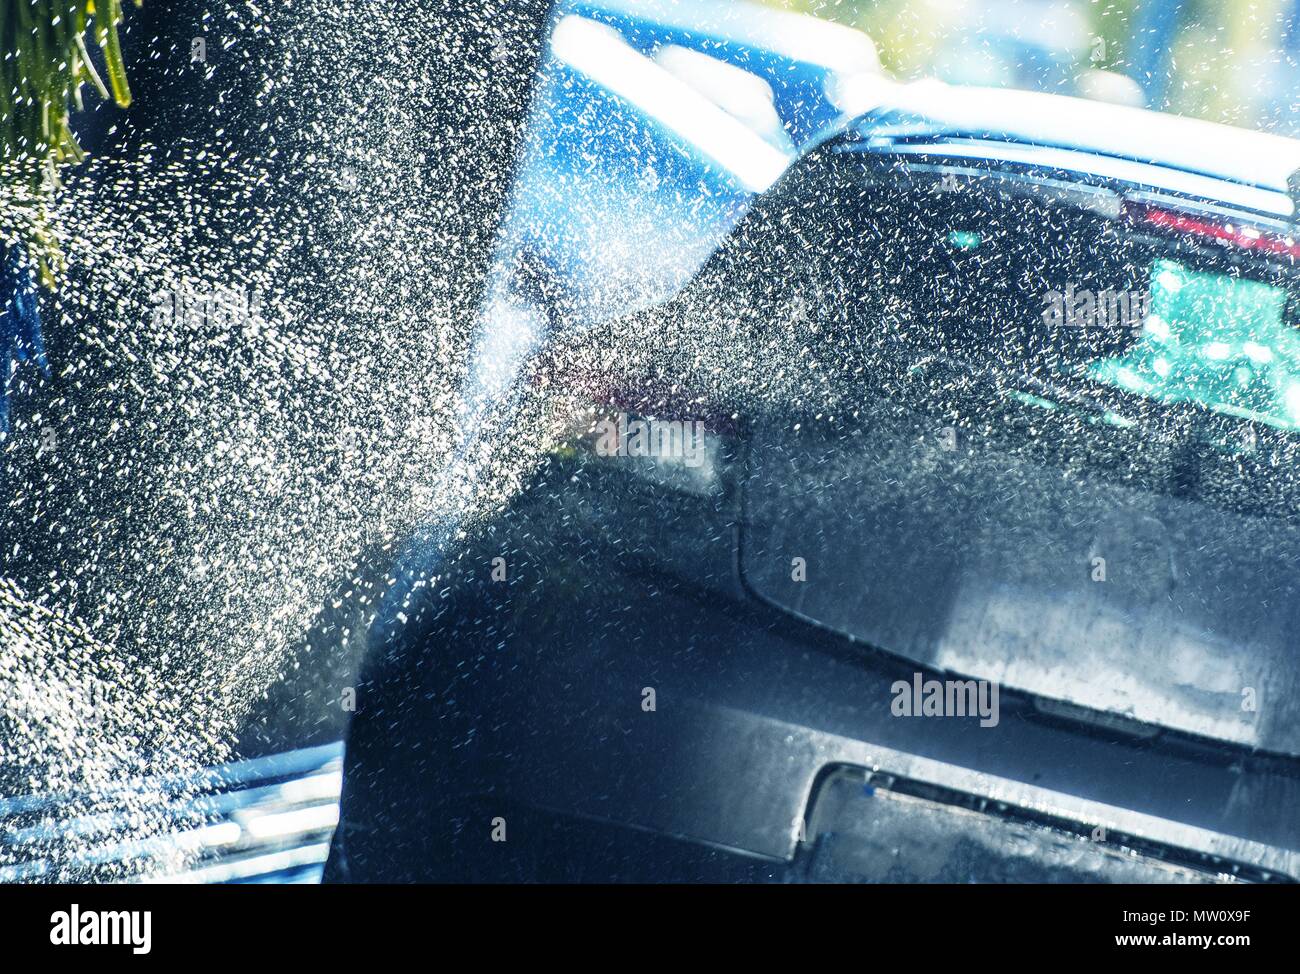 Vehicle Washing in the Car Wash. Automatic Washer Spraying the Car with Active Body Cleaning Foam Stock Photo